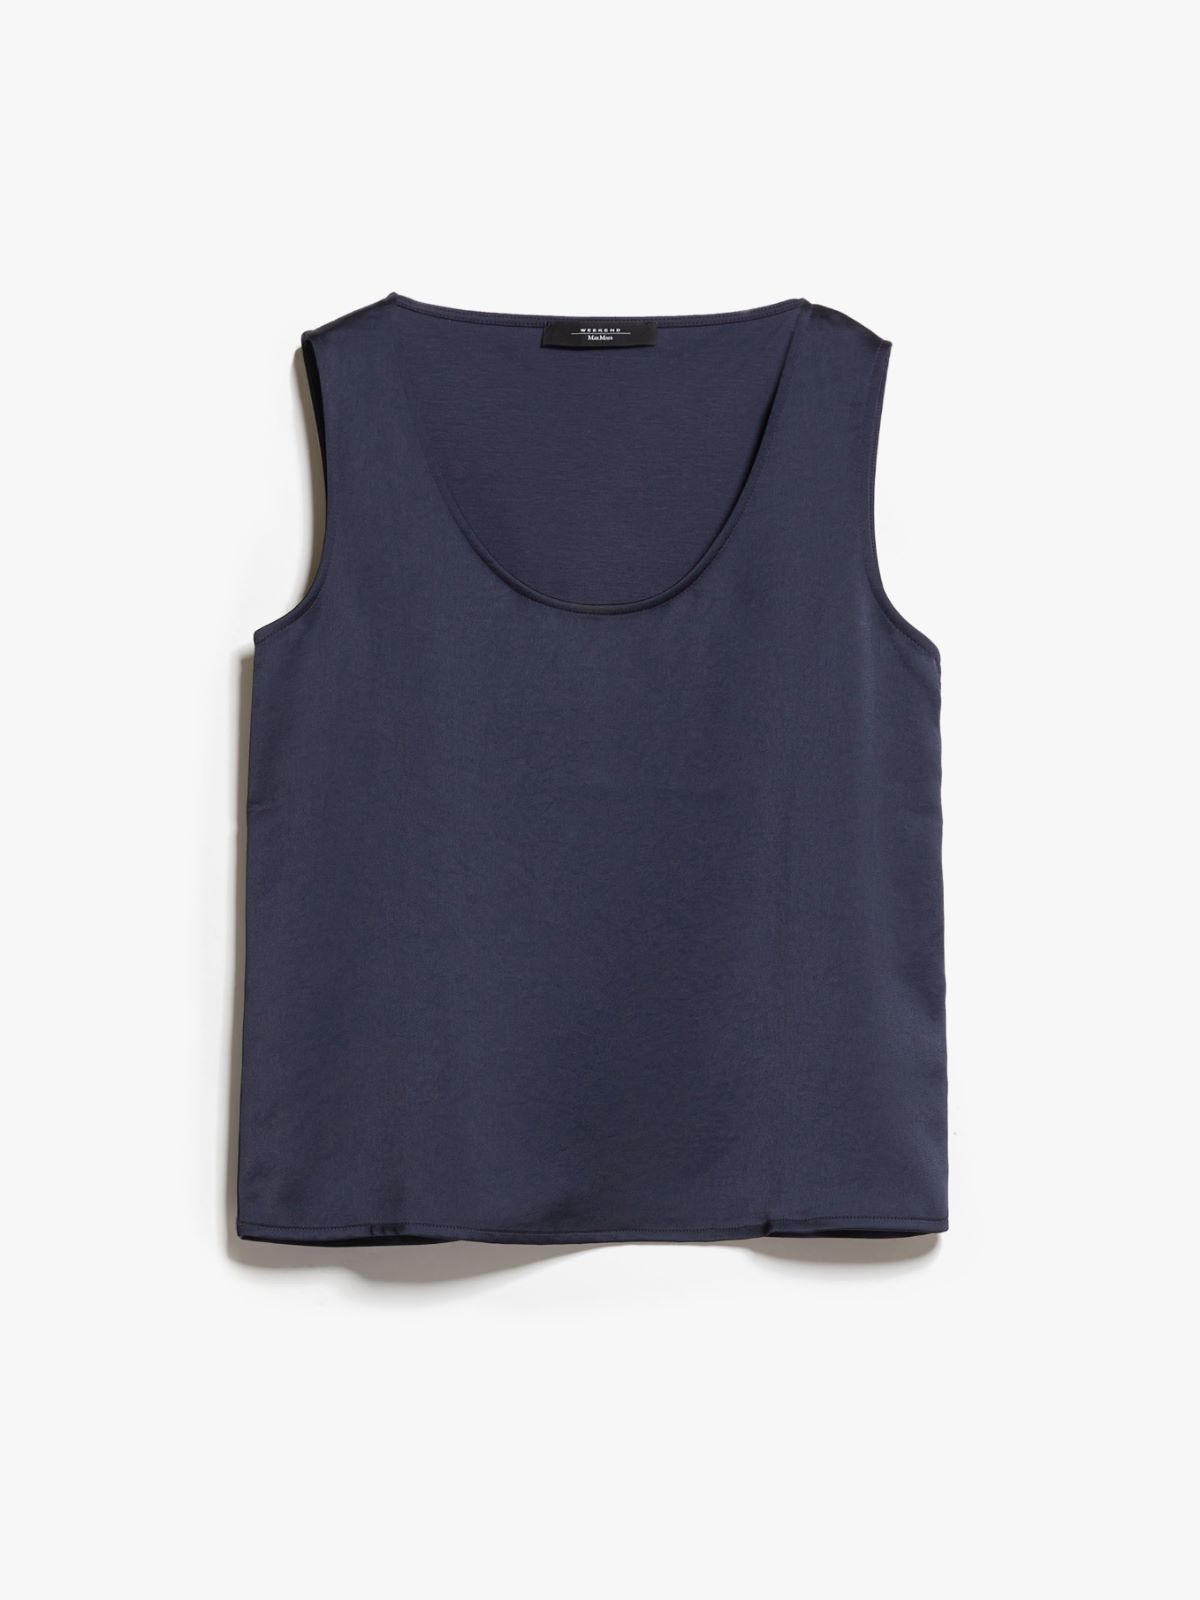 Straight-cut top in satin and jersey - NAVY - Weekend Max Mara - 6